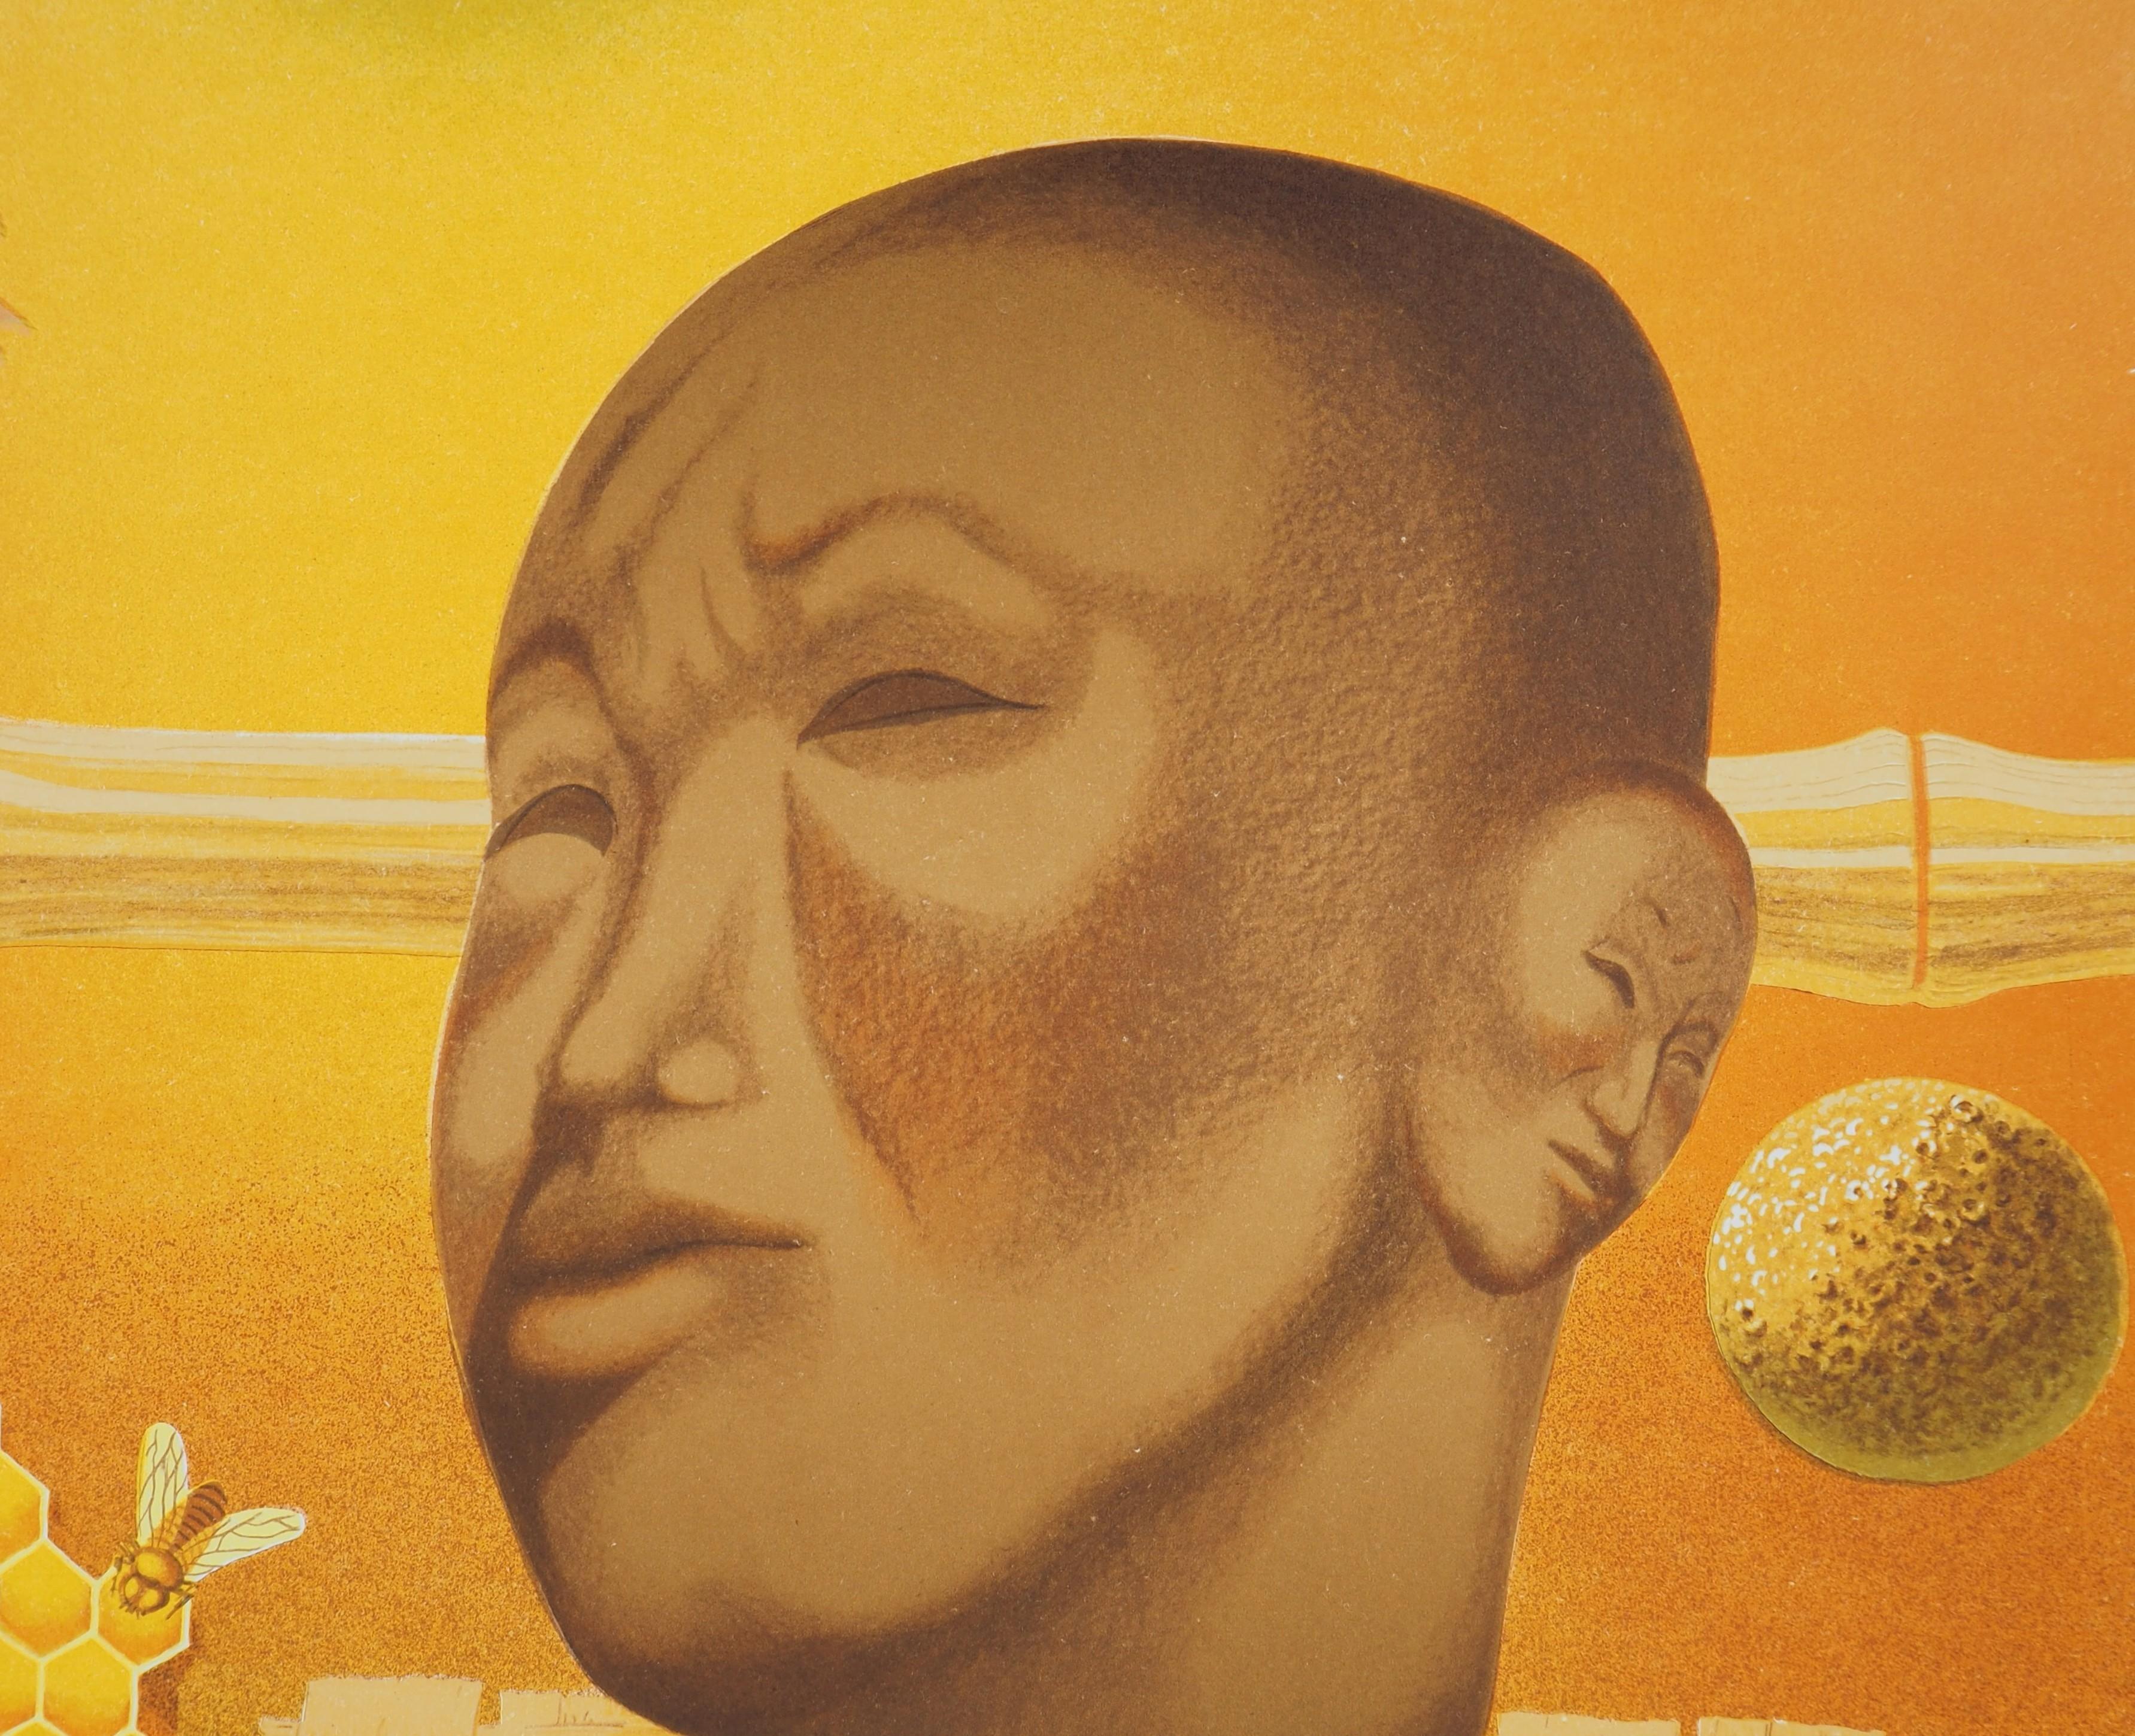 Peace : Buddha, Life in Yellow - Handsigned Lithograph, Limited to 250 copies For Sale 2